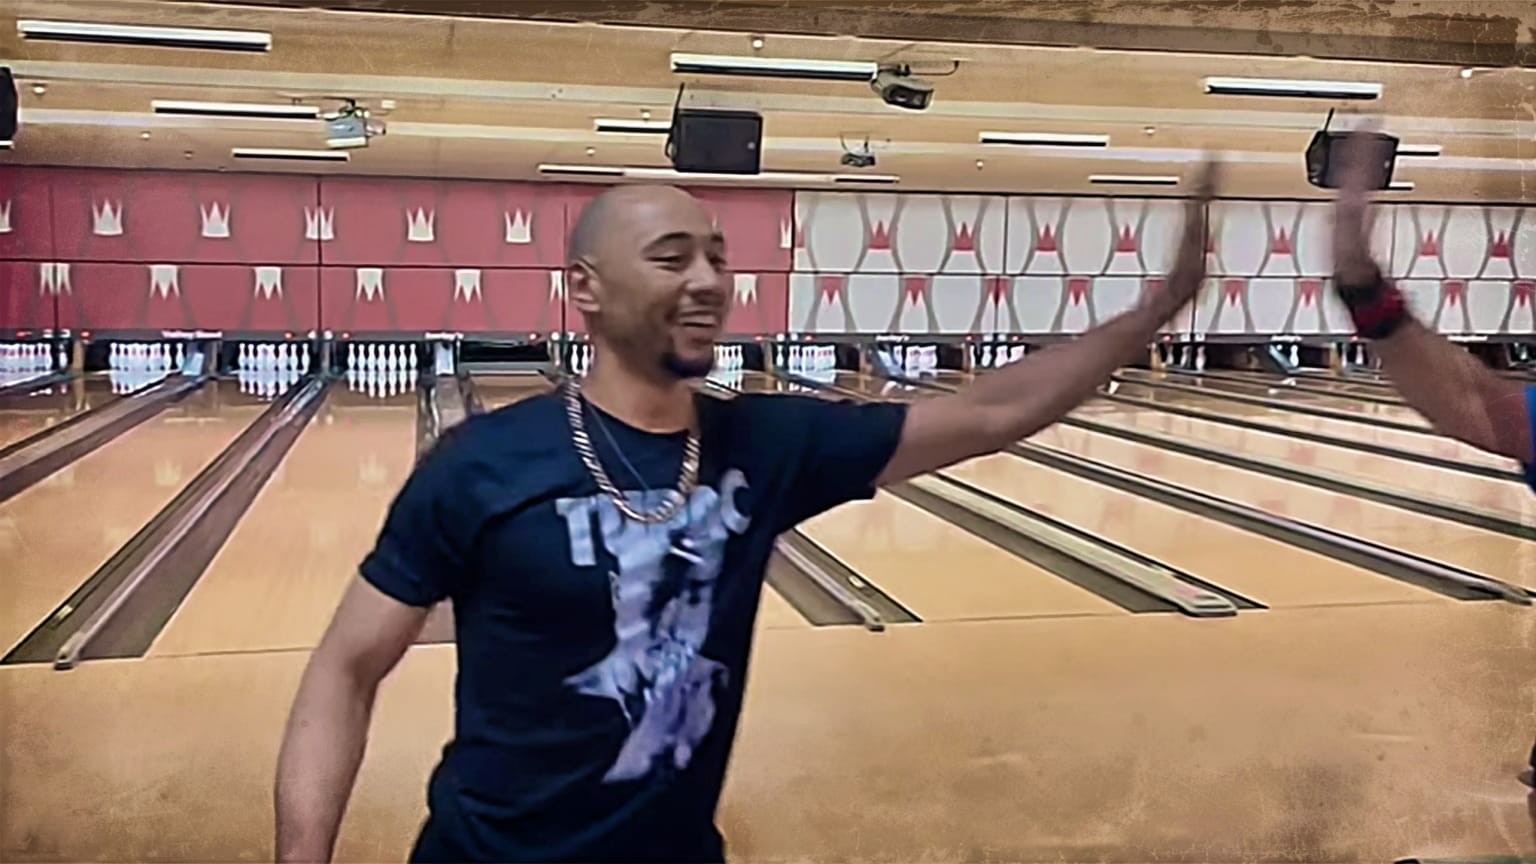 Mookie Betts high-fives a person at a bowling alley